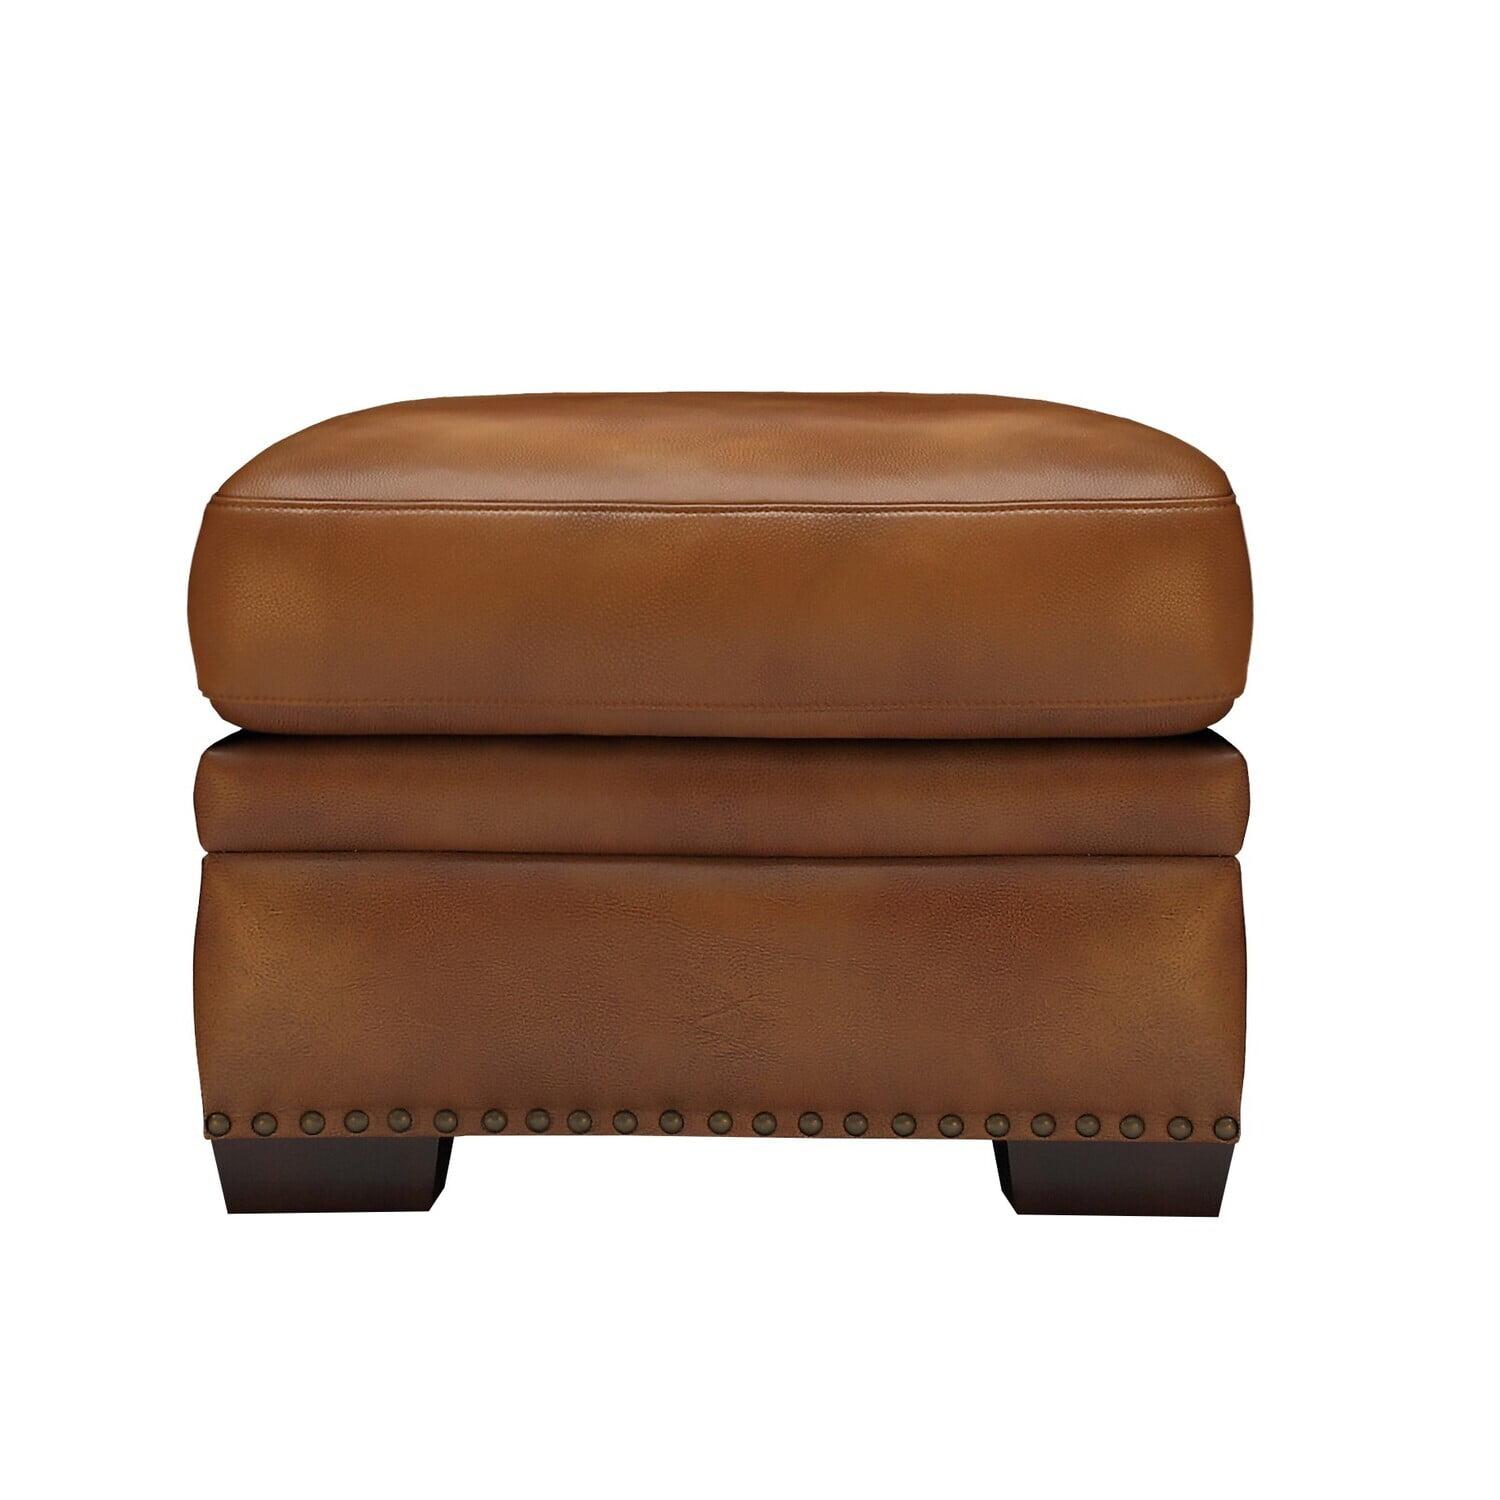 Classic Brown Top Grain Cowhide Leather Ottoman with Nailhead Trim